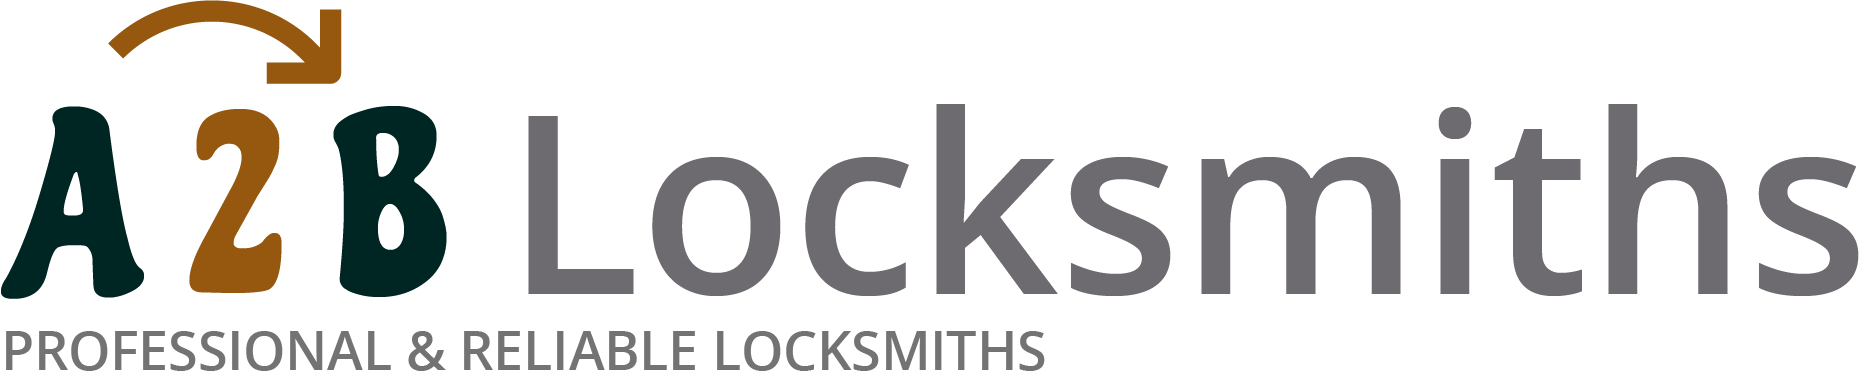 If you are locked out of house in Twickenham, our 24/7 local emergency locksmith services can help you.